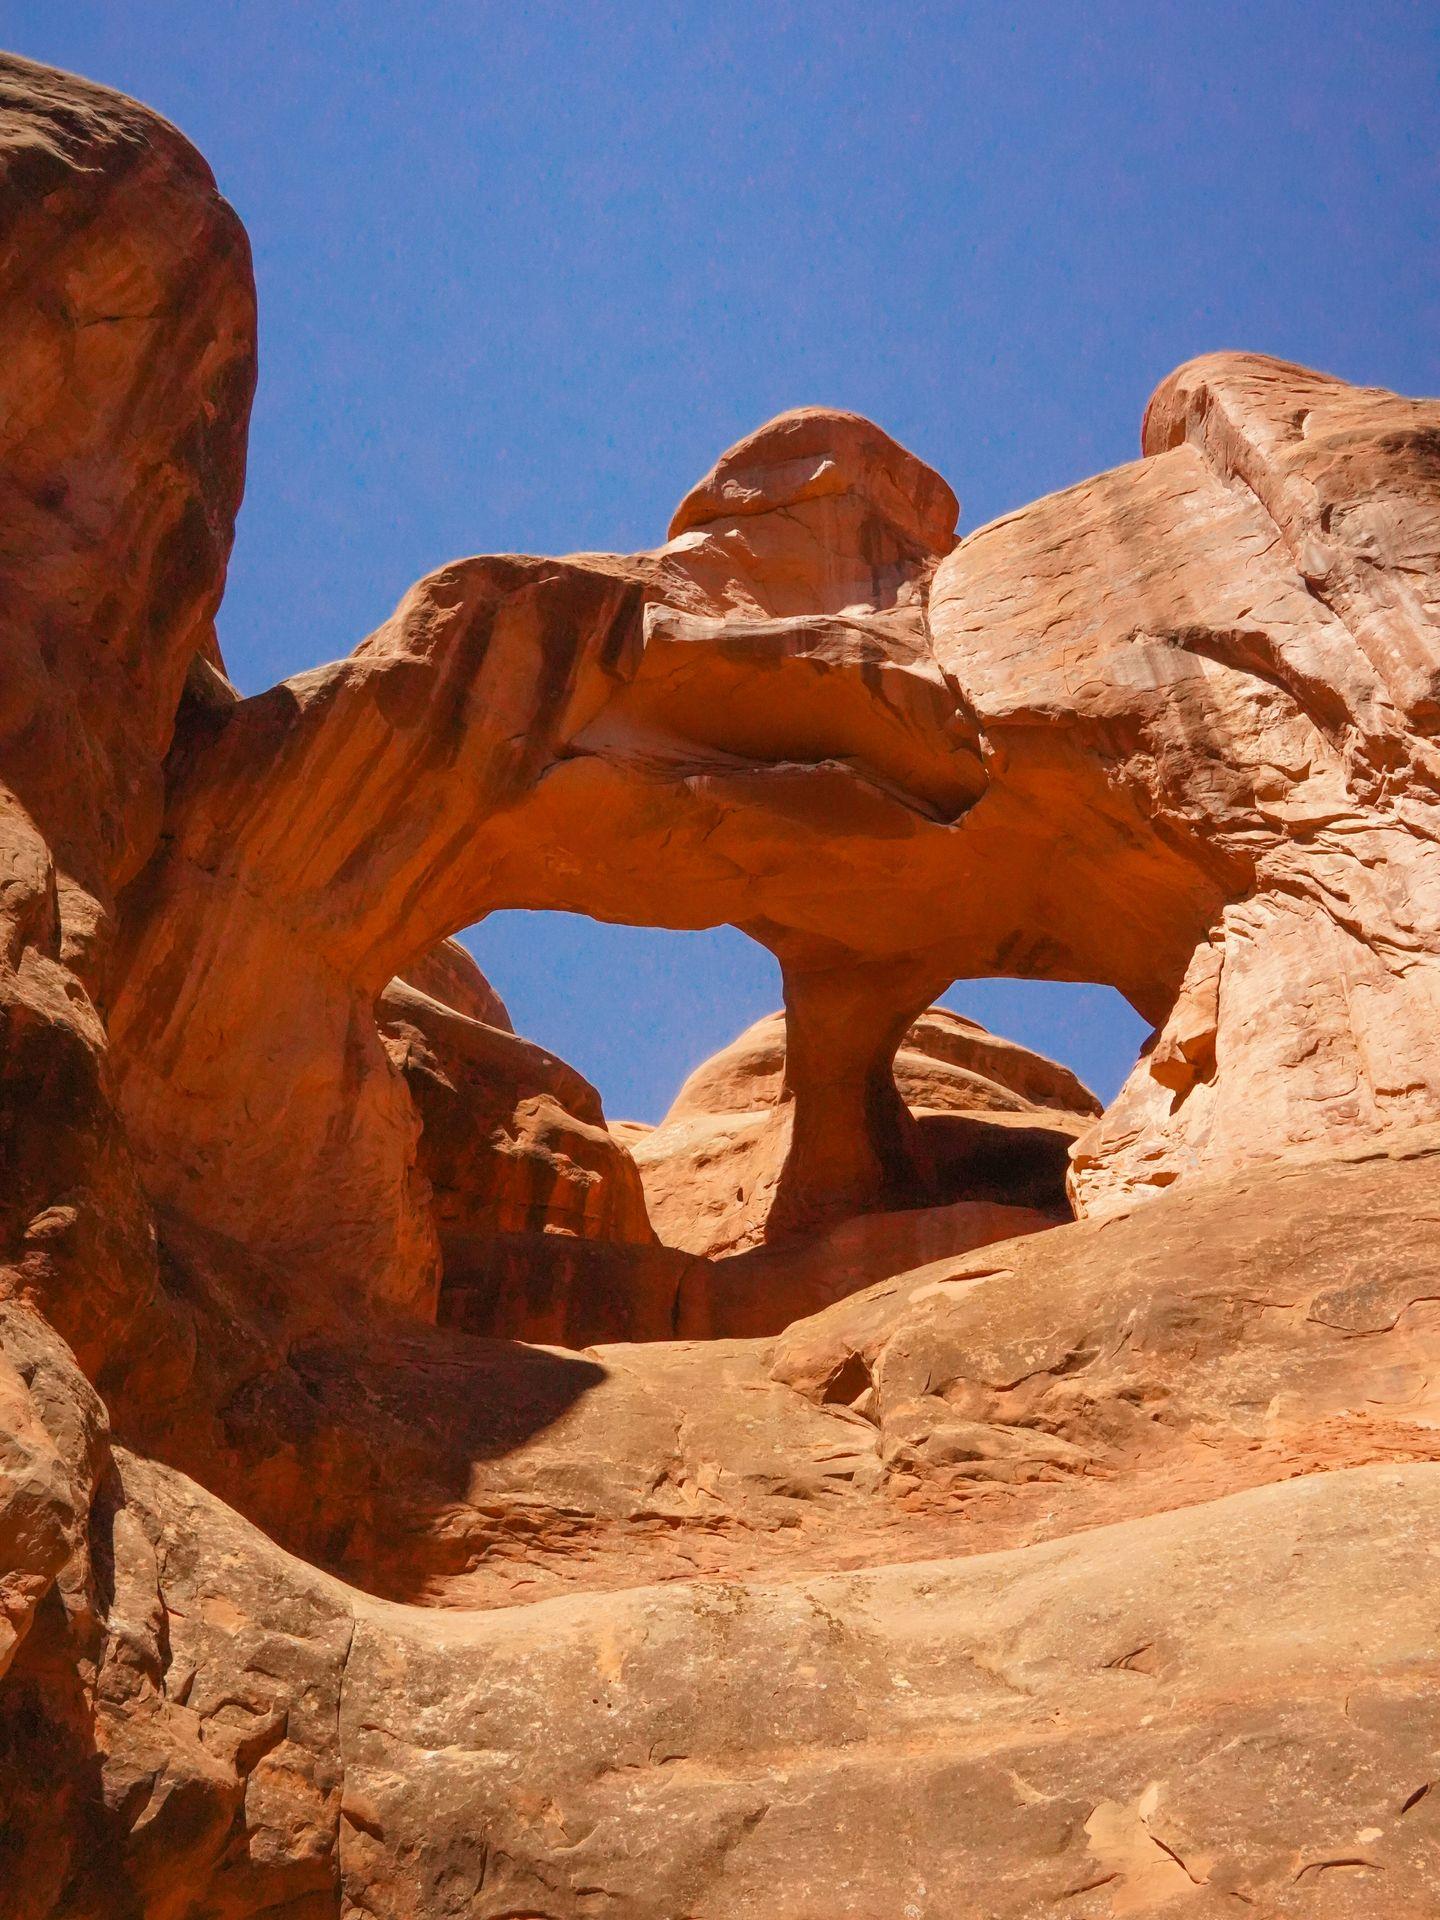 Looking up at the Skull Arch on Fiery Furnace trail